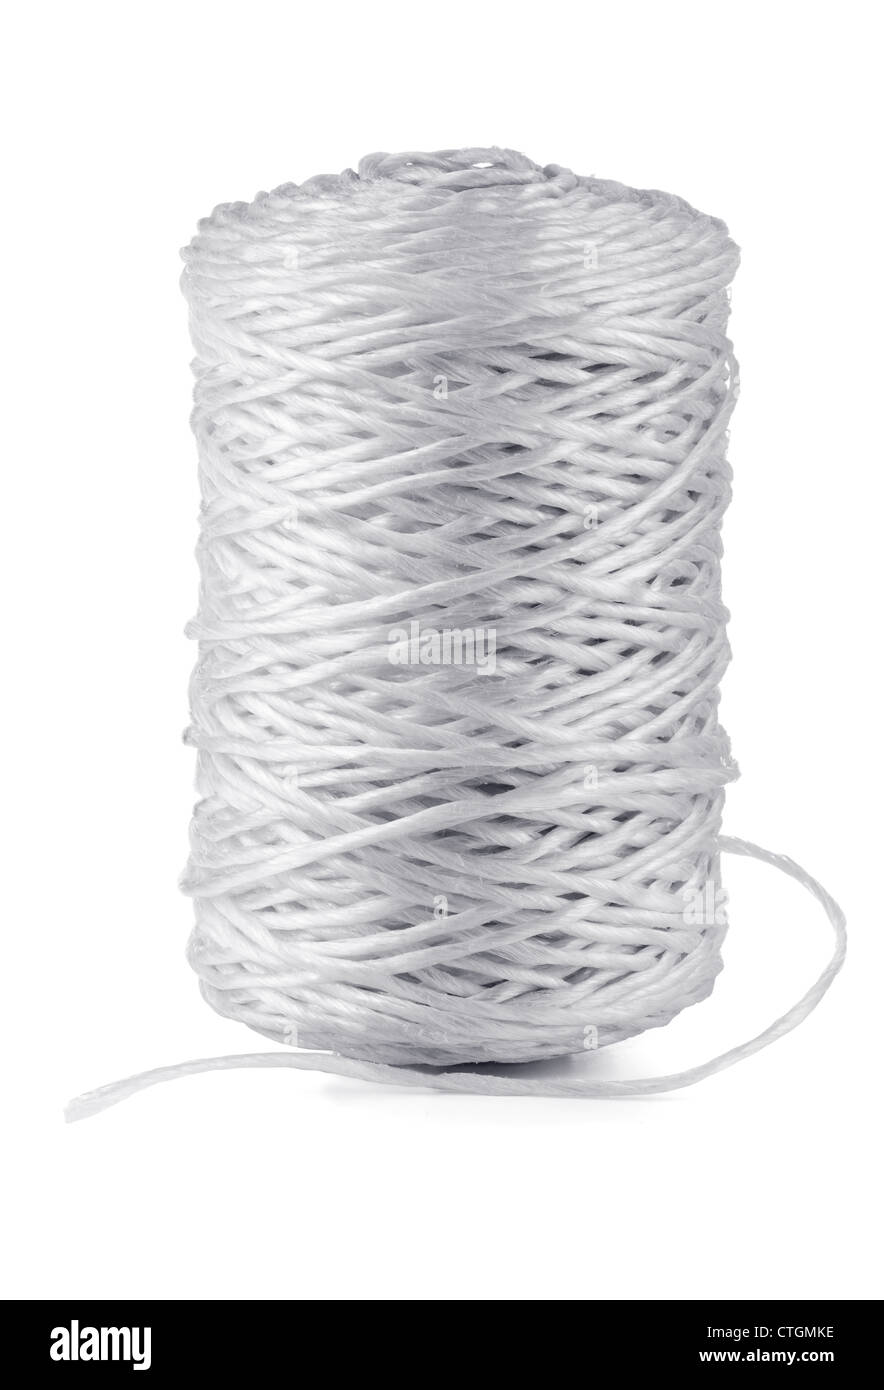 Hank of plastic rope isolated on white Stock Photo